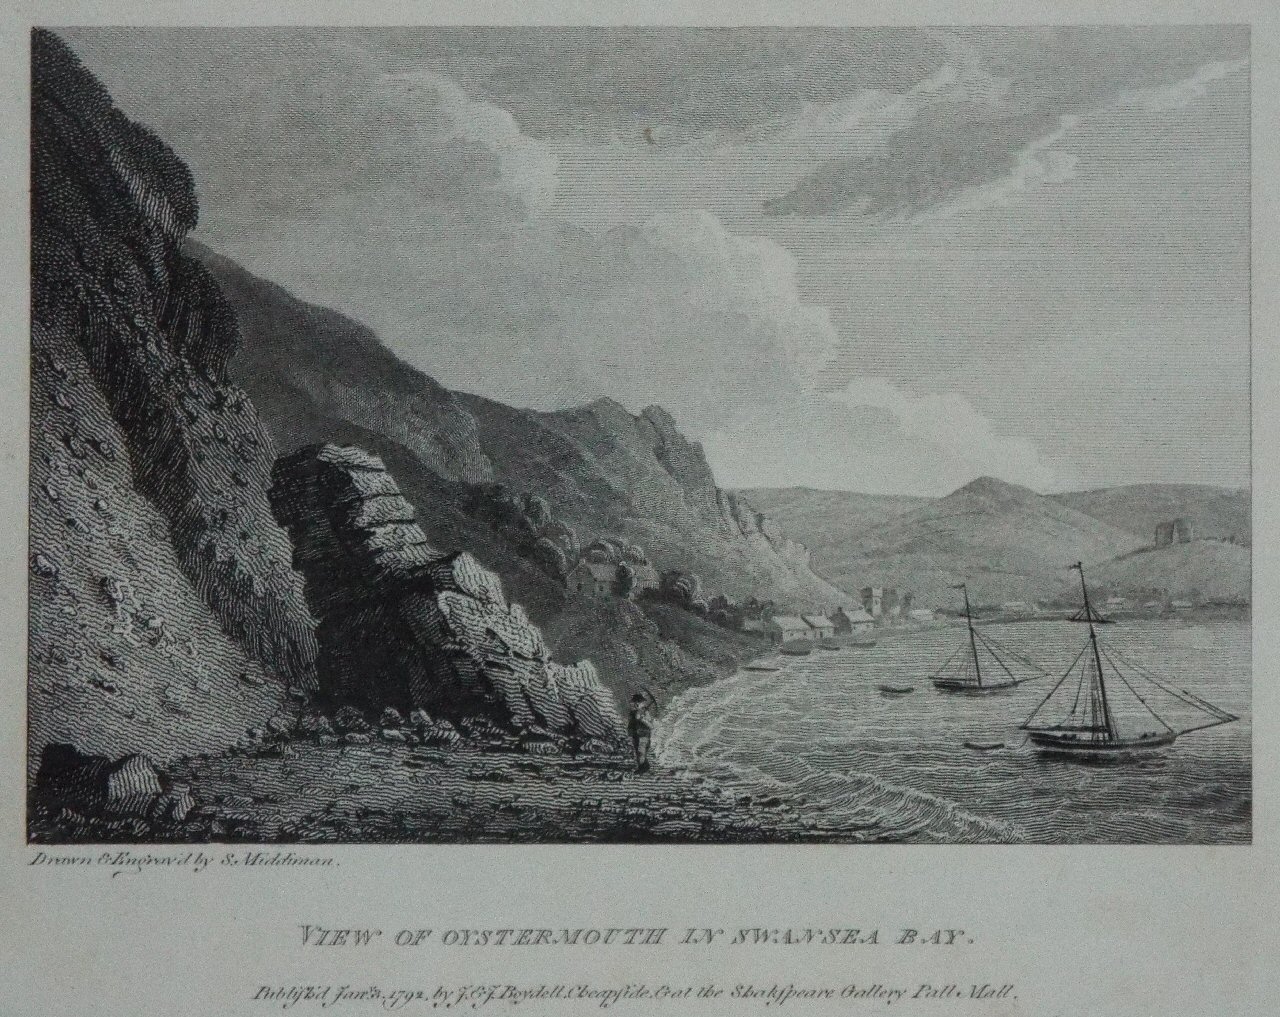 Print - View of Oystermouth in Swansea Bay. - Middiman